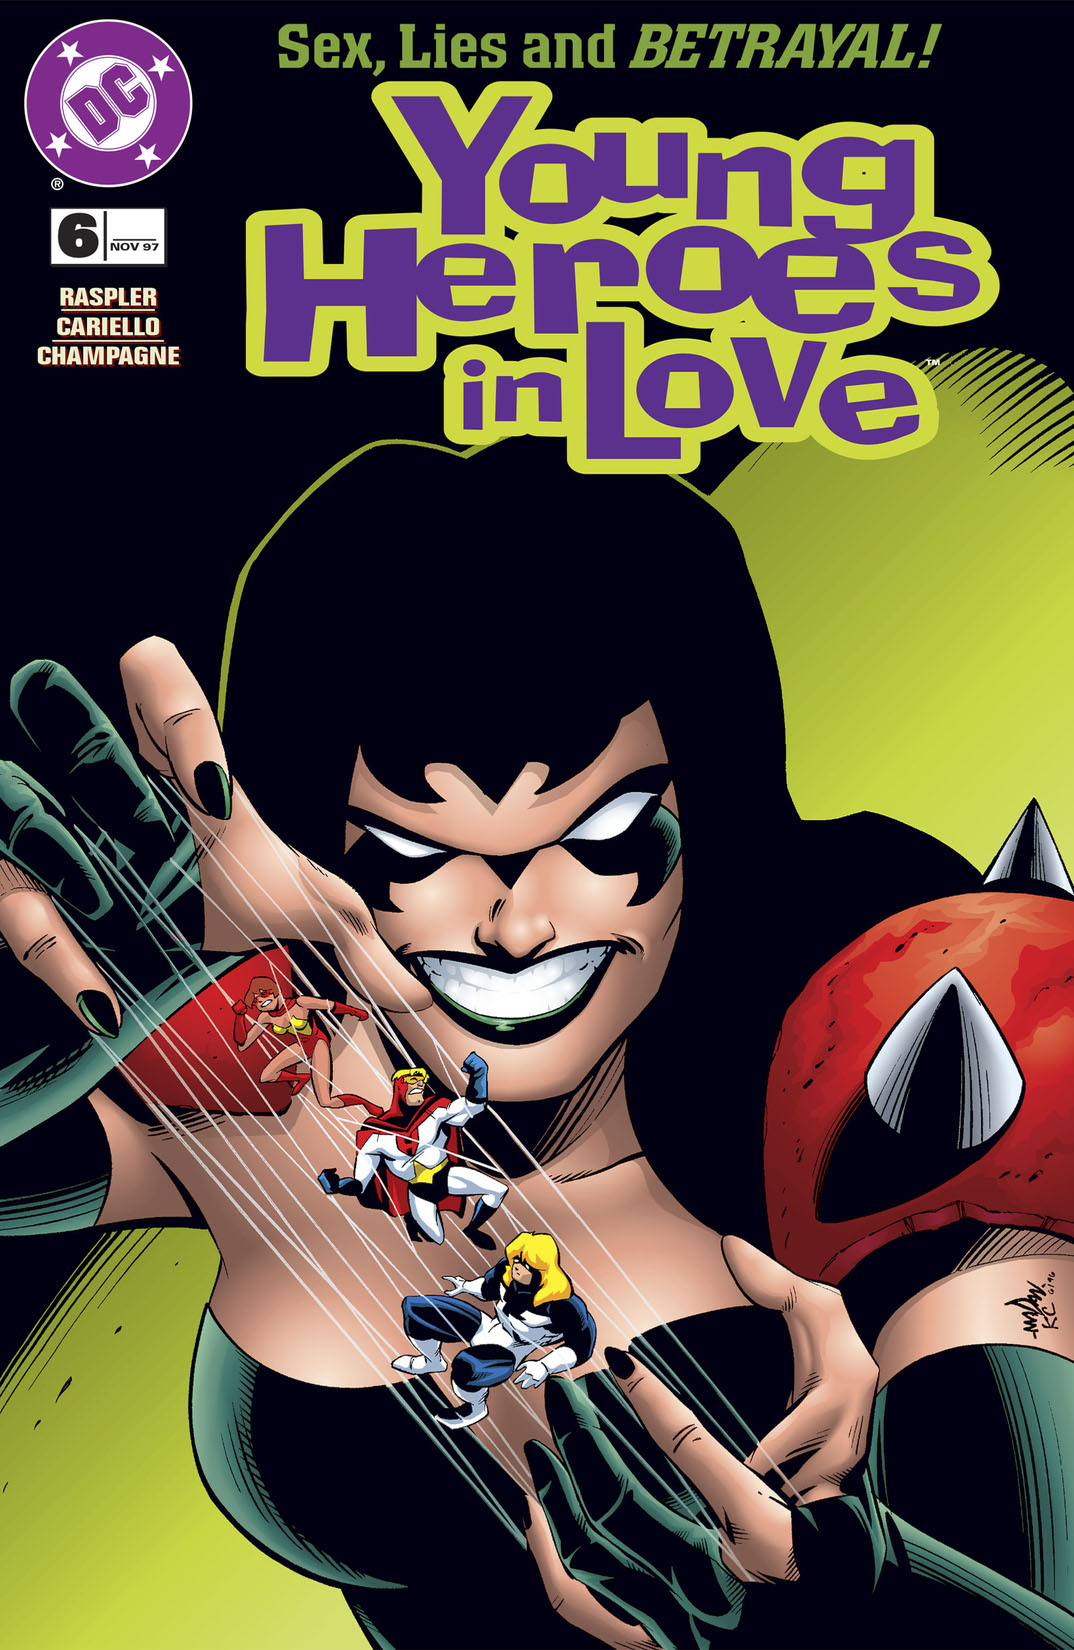 Young Heroes in Love #6 preview images